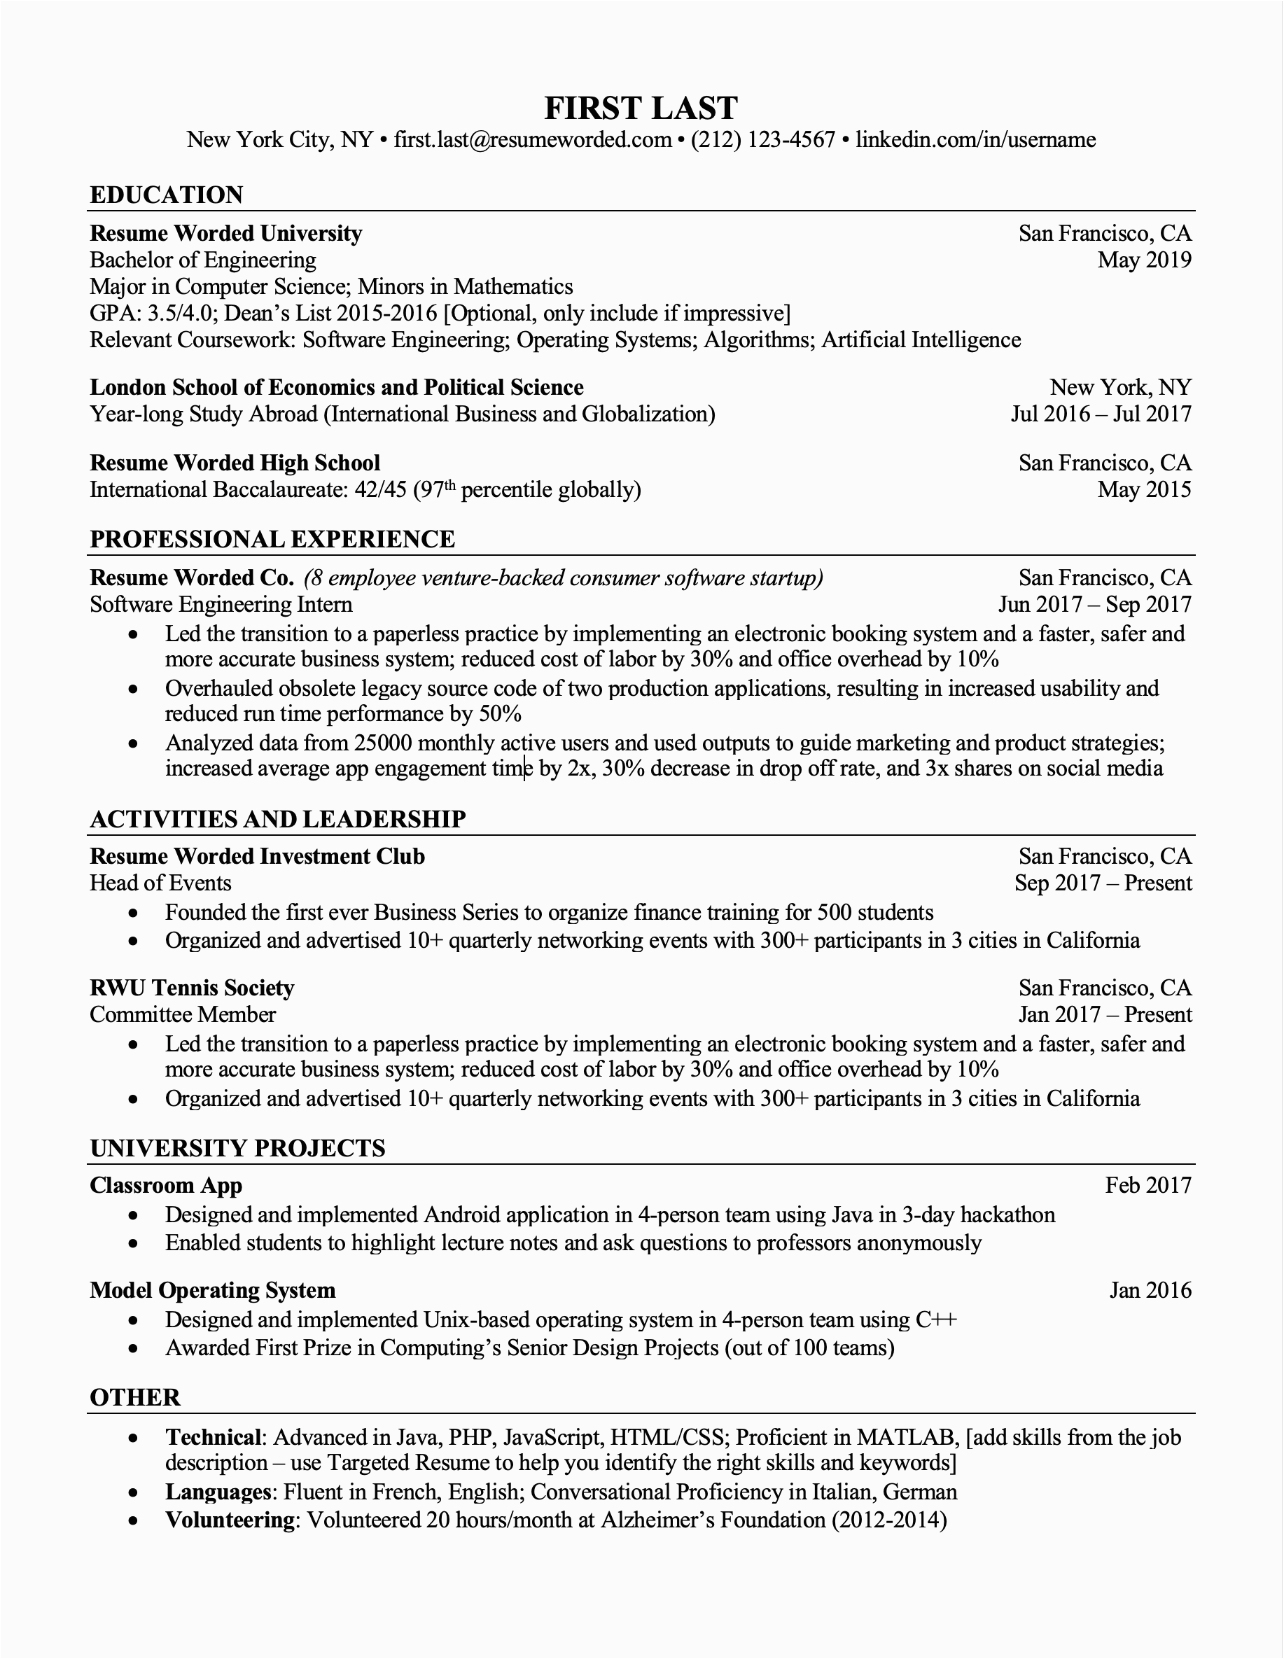 Resume Template for Little Work Experience Resume Template Little Work Experience why is Resume